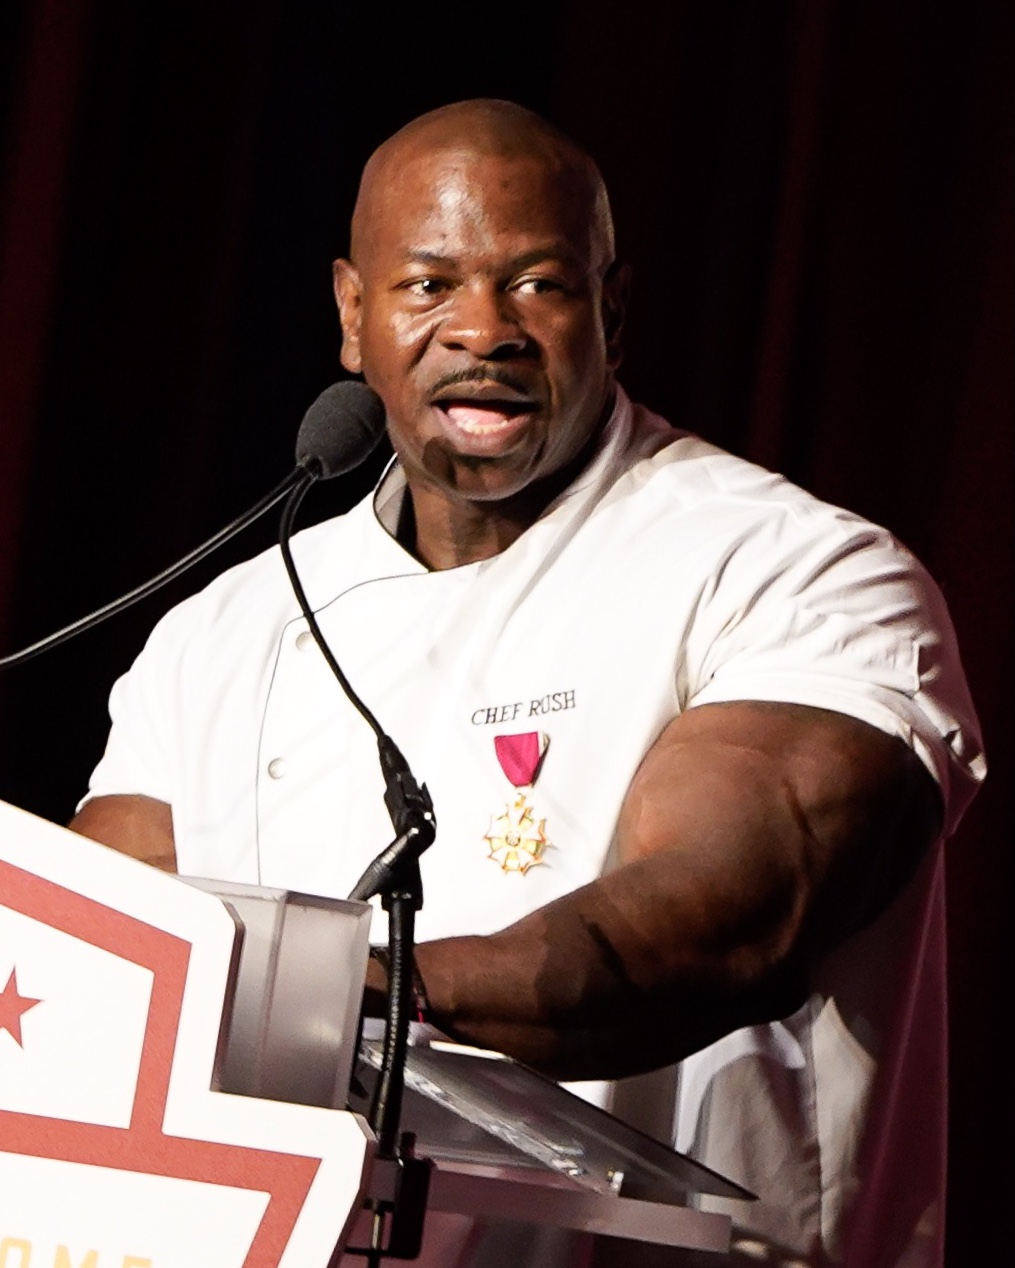 Rush speaking at the [[Washington Redskins]] 58th annual Welcome Home Luncheon in 2019